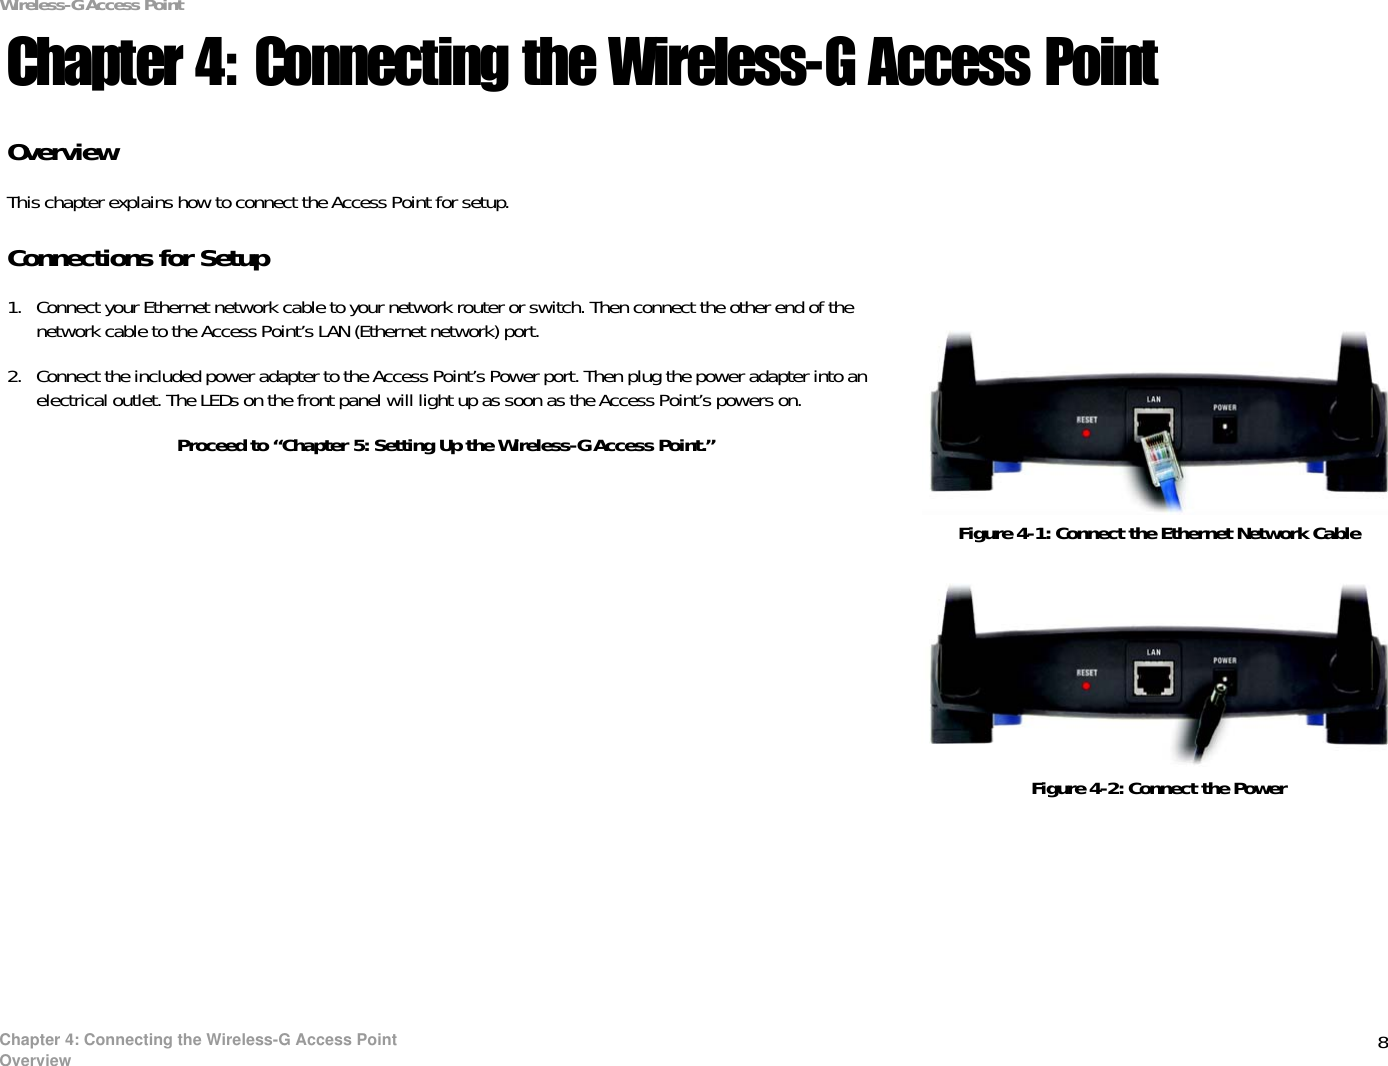 8Chapter 4: Connecting the Wireless-G Access PointOverviewWireless-G Access PointChapter 4: Connecting the Wireless-G Access PointOverviewThis chapter explains how to connect the Access Point for setup.Connections for Setup1. Connect your Ethernet network cable to your network router or switch. Then connect the other end of the network cable to the Access Point’s LAN (Ethernet network) port.2. Connect the included power adapter to the Access Point’s Power port. Then plug the power adapter into an electrical outlet. The LEDs on the front panel will light up as soon as the Access Point’s powers on.Proceed to “Chapter 5: Setting Up the Wireless-G Access Point.”Figure 4-1: Connect the Ethernet Network CableFigure 4-2: Connect the Power